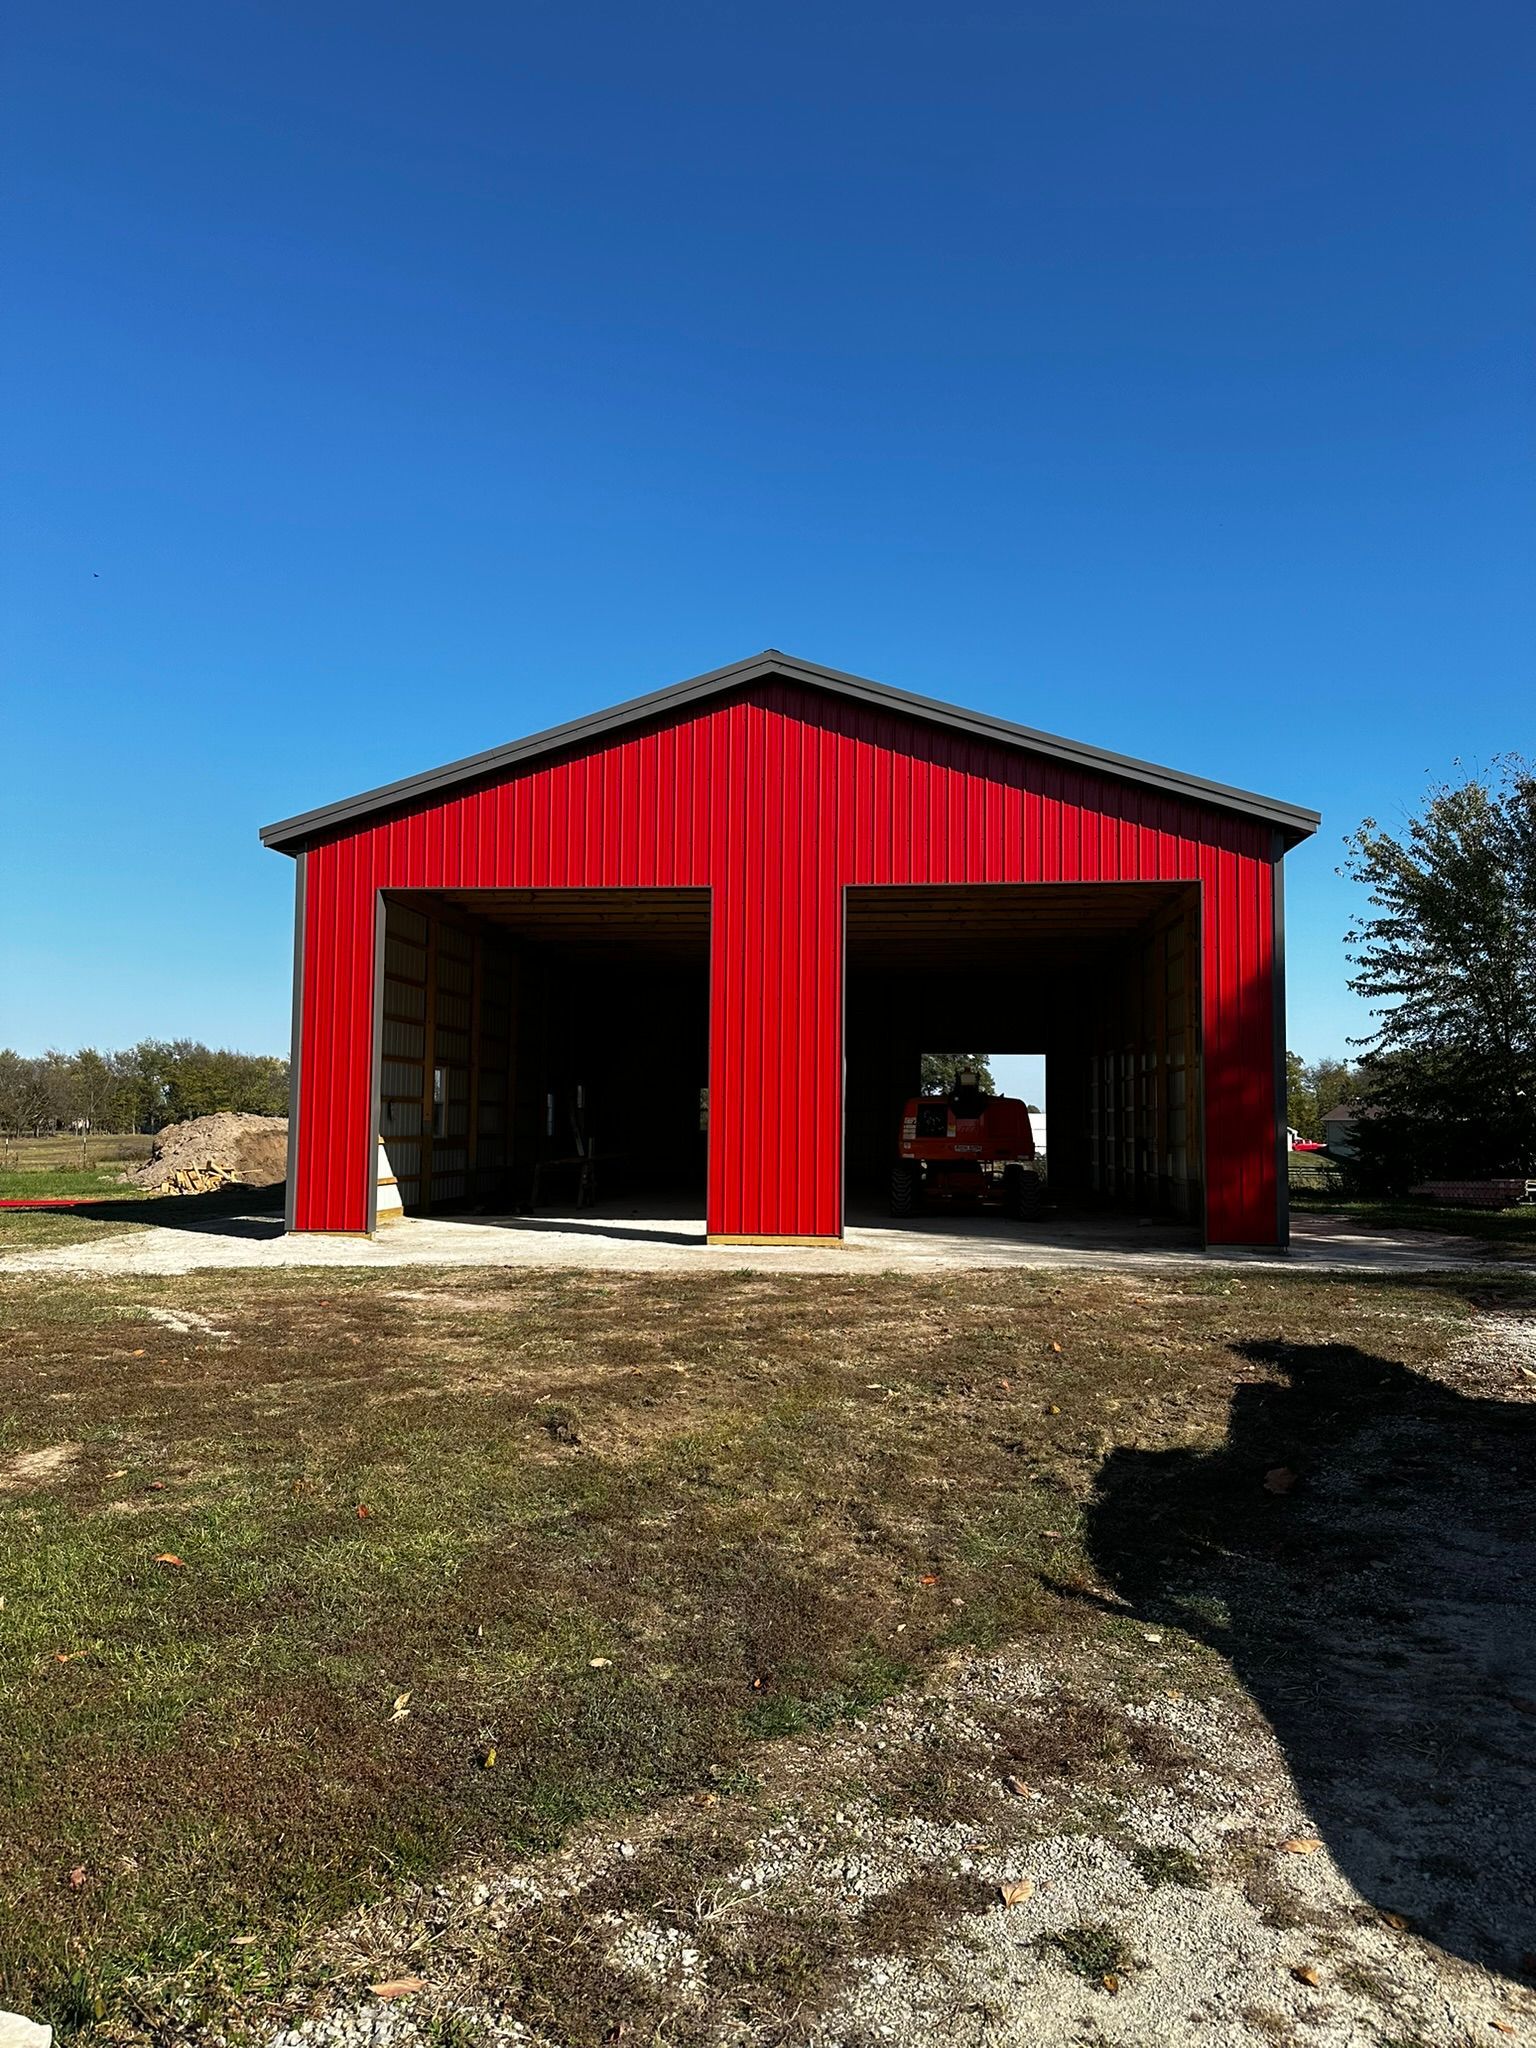 a red barn is sitting in the middle of a grassy field .